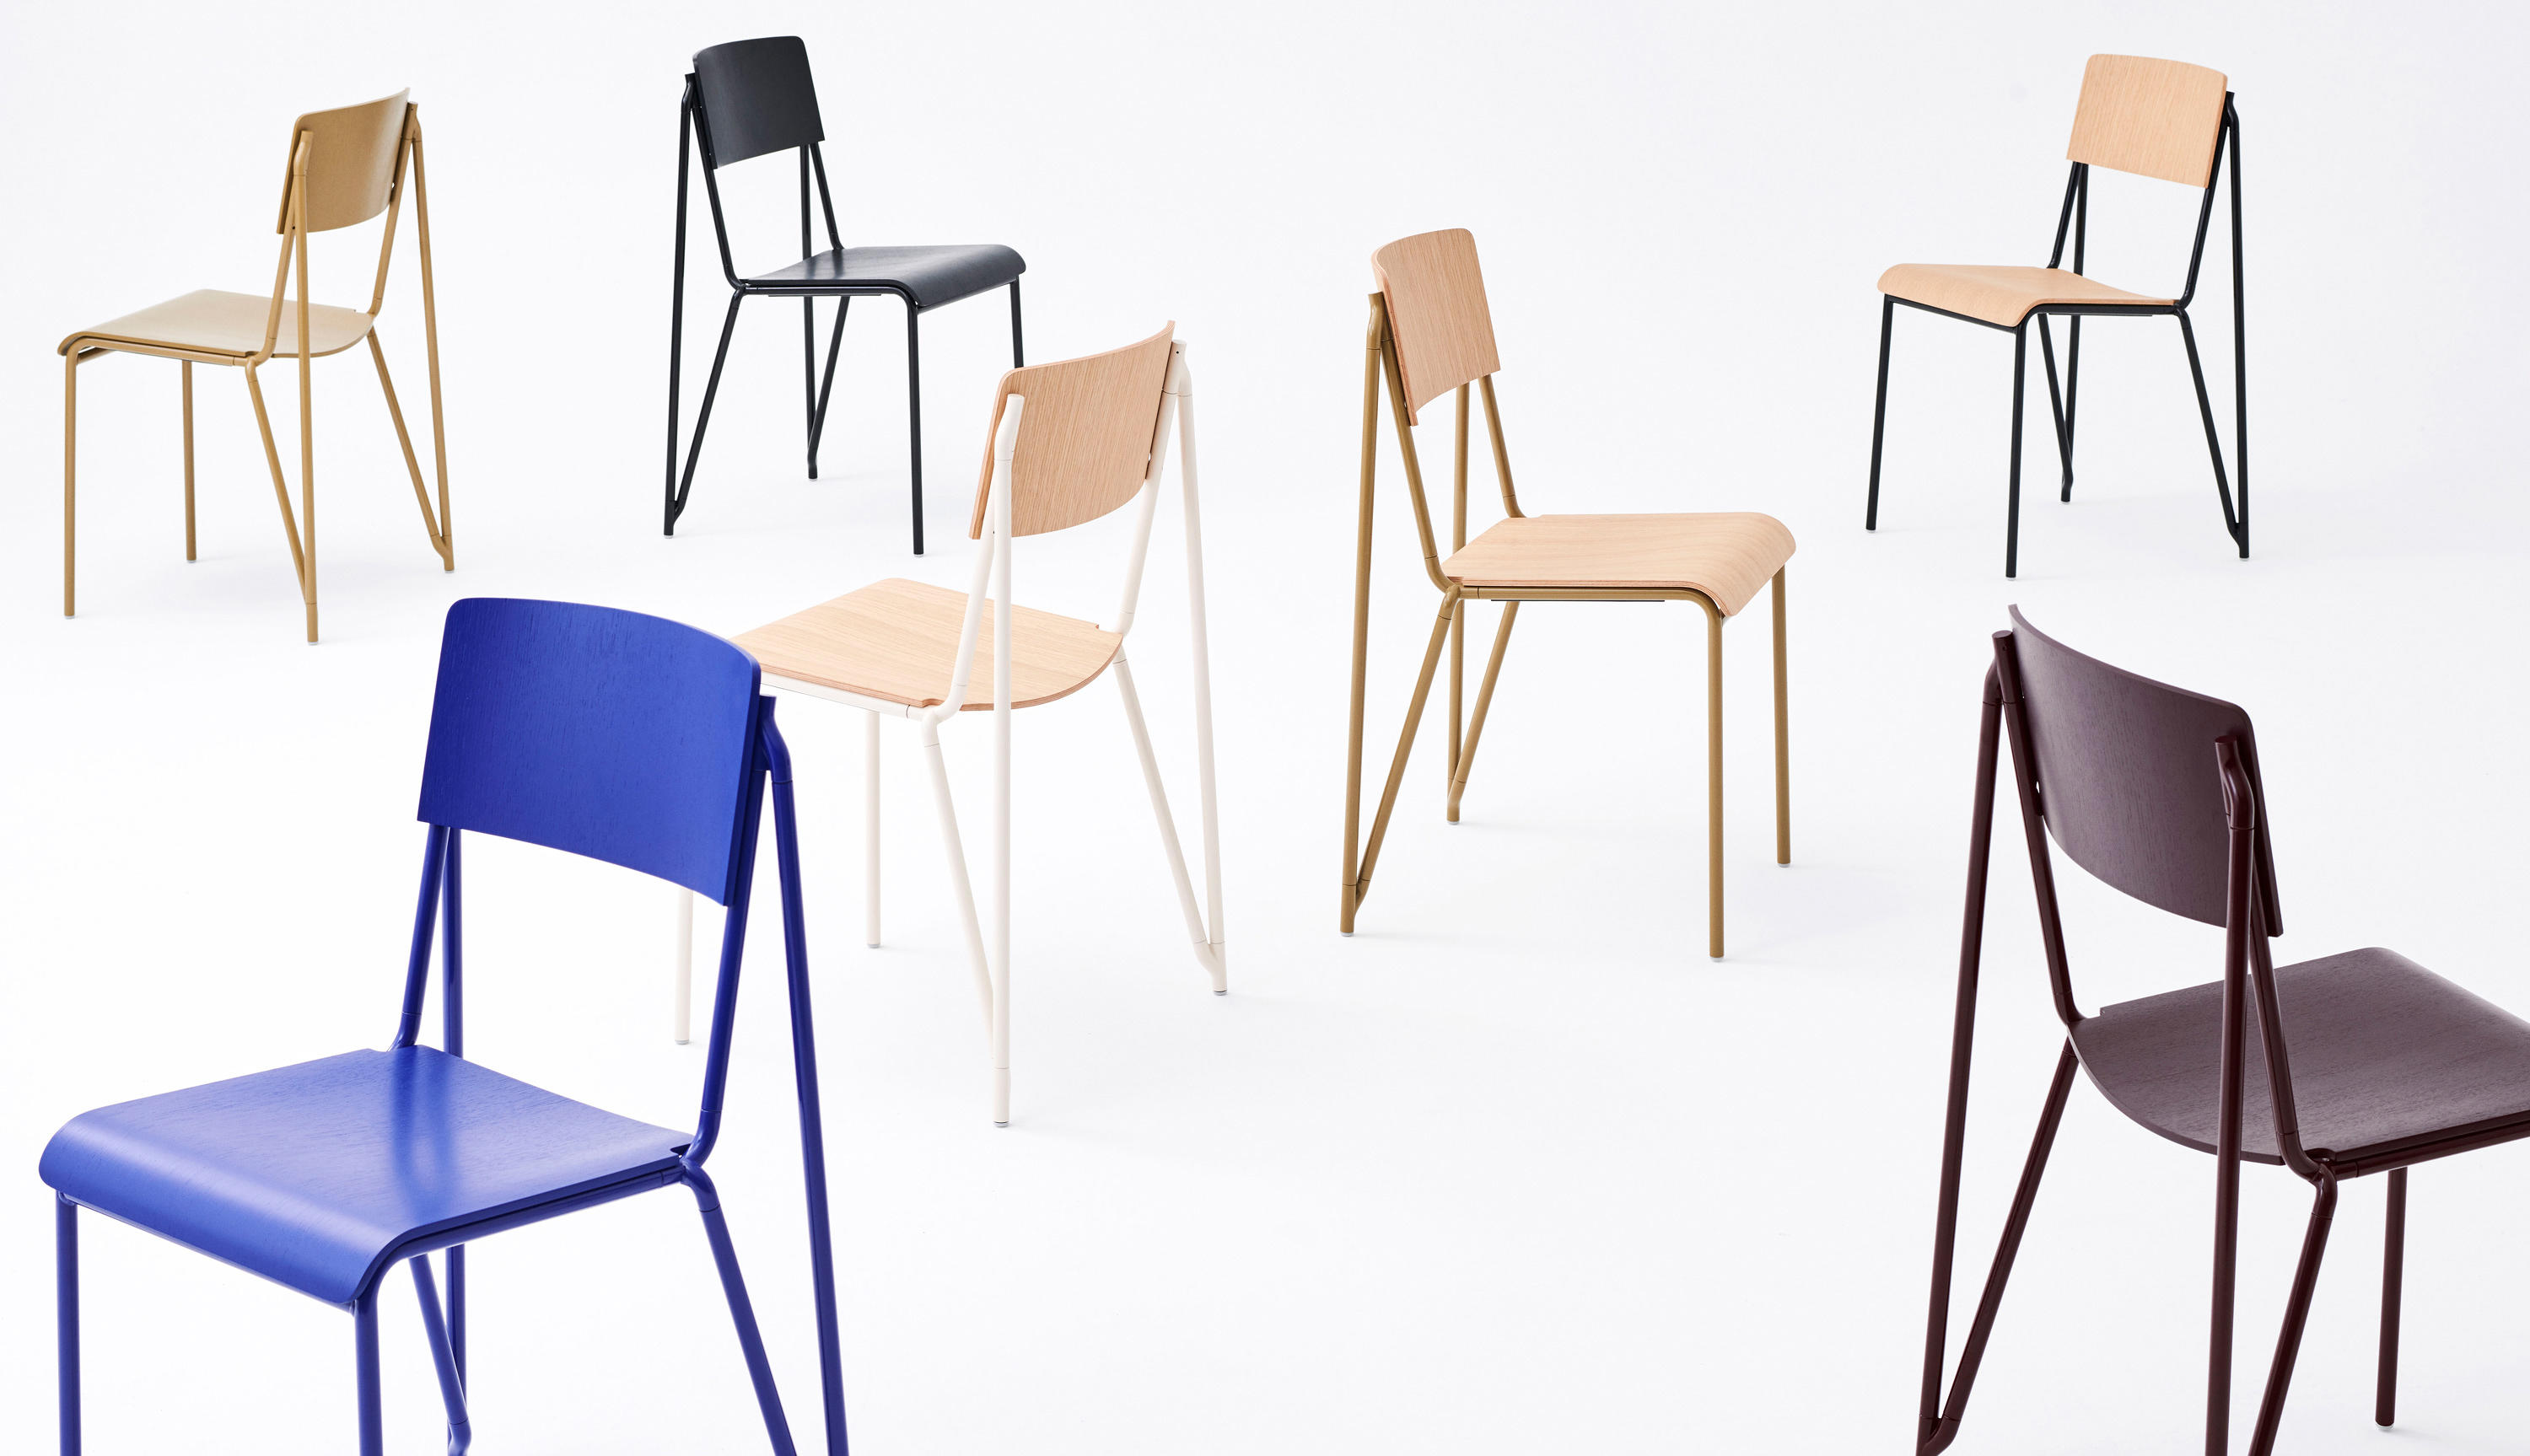 PETIT STANDARD - Chairs from HAY | Architonic